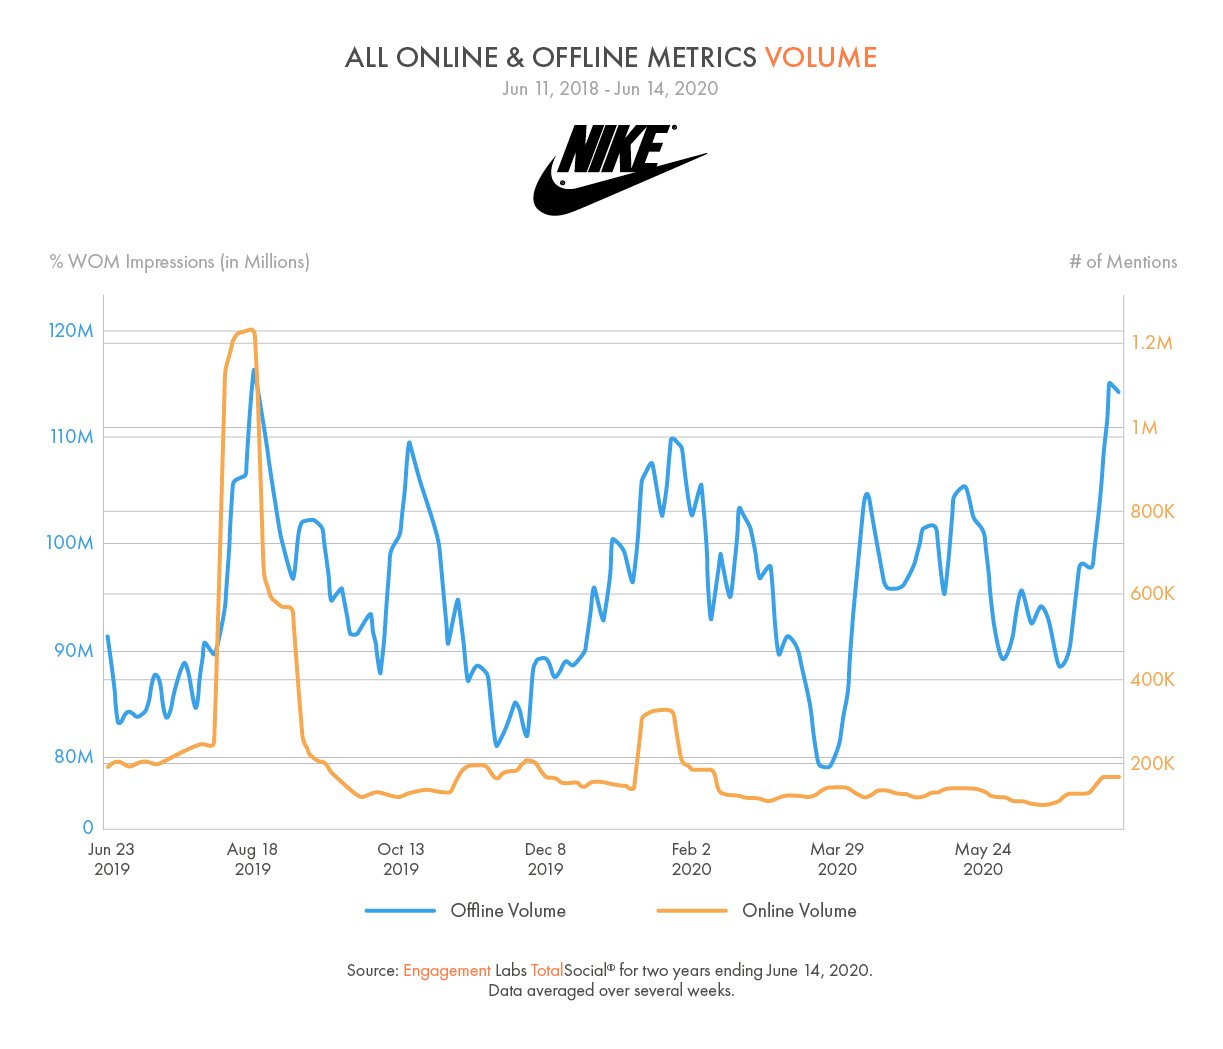 NIKE’S OFFLINE CONVERSATION RISES TO 2018 LEVEL, BUT SOCIAL MEDIA IS FLAT